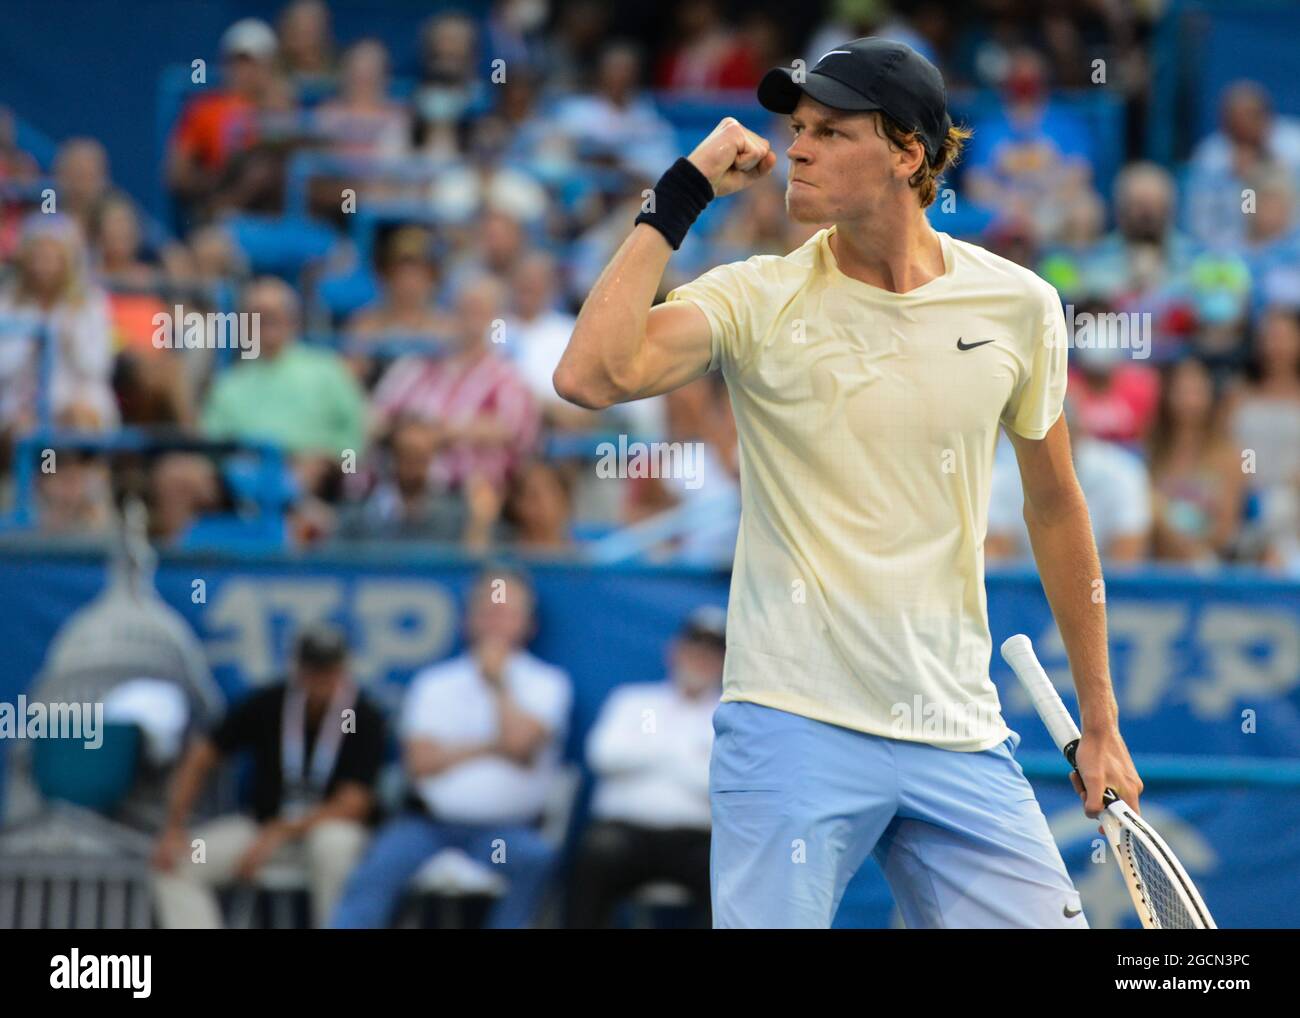 August 8, 2021, Washington, District of Columbia, USA JANNIK SINNER of Italy celebrates in the final of the Citi Open tennis tournament